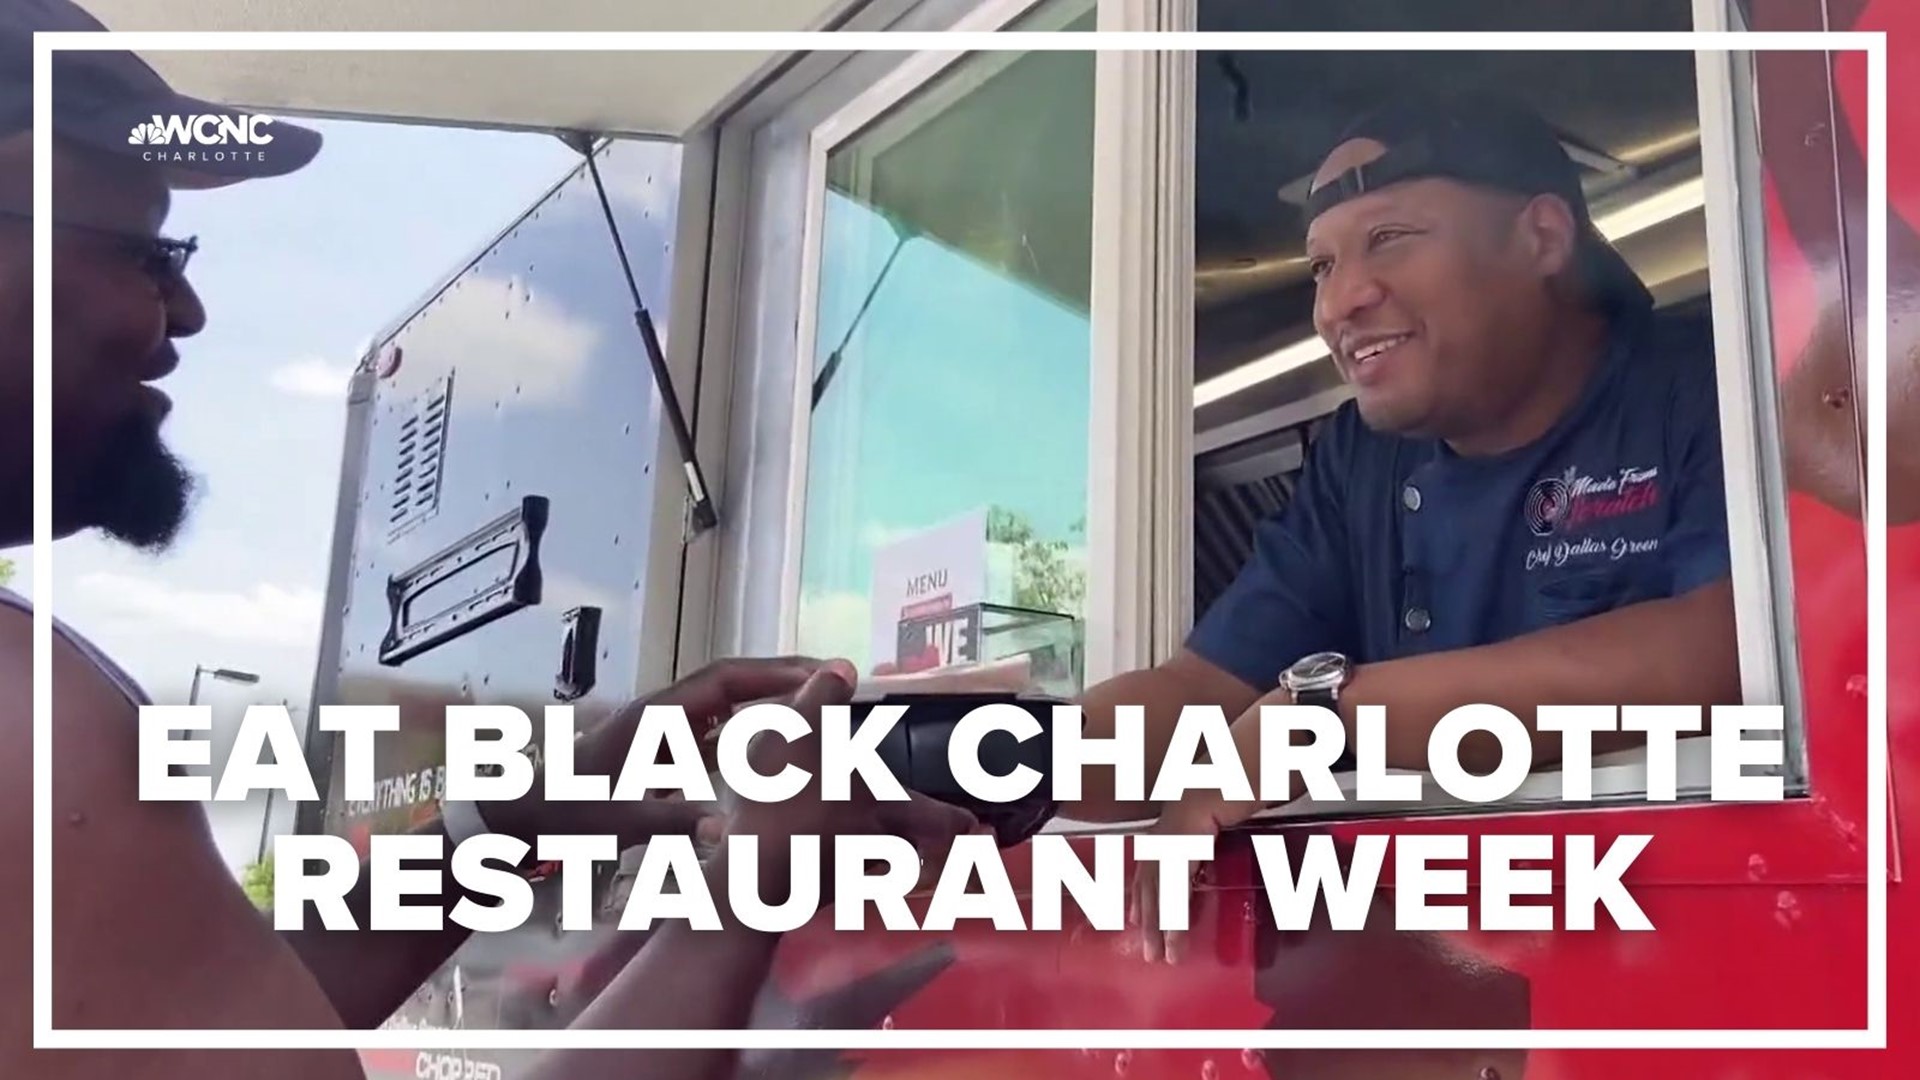 Eat Black Charlotte is a week-long celebration of Black-owned restaurants in the Charlotte area to promote and sustain Black-owned businesses.